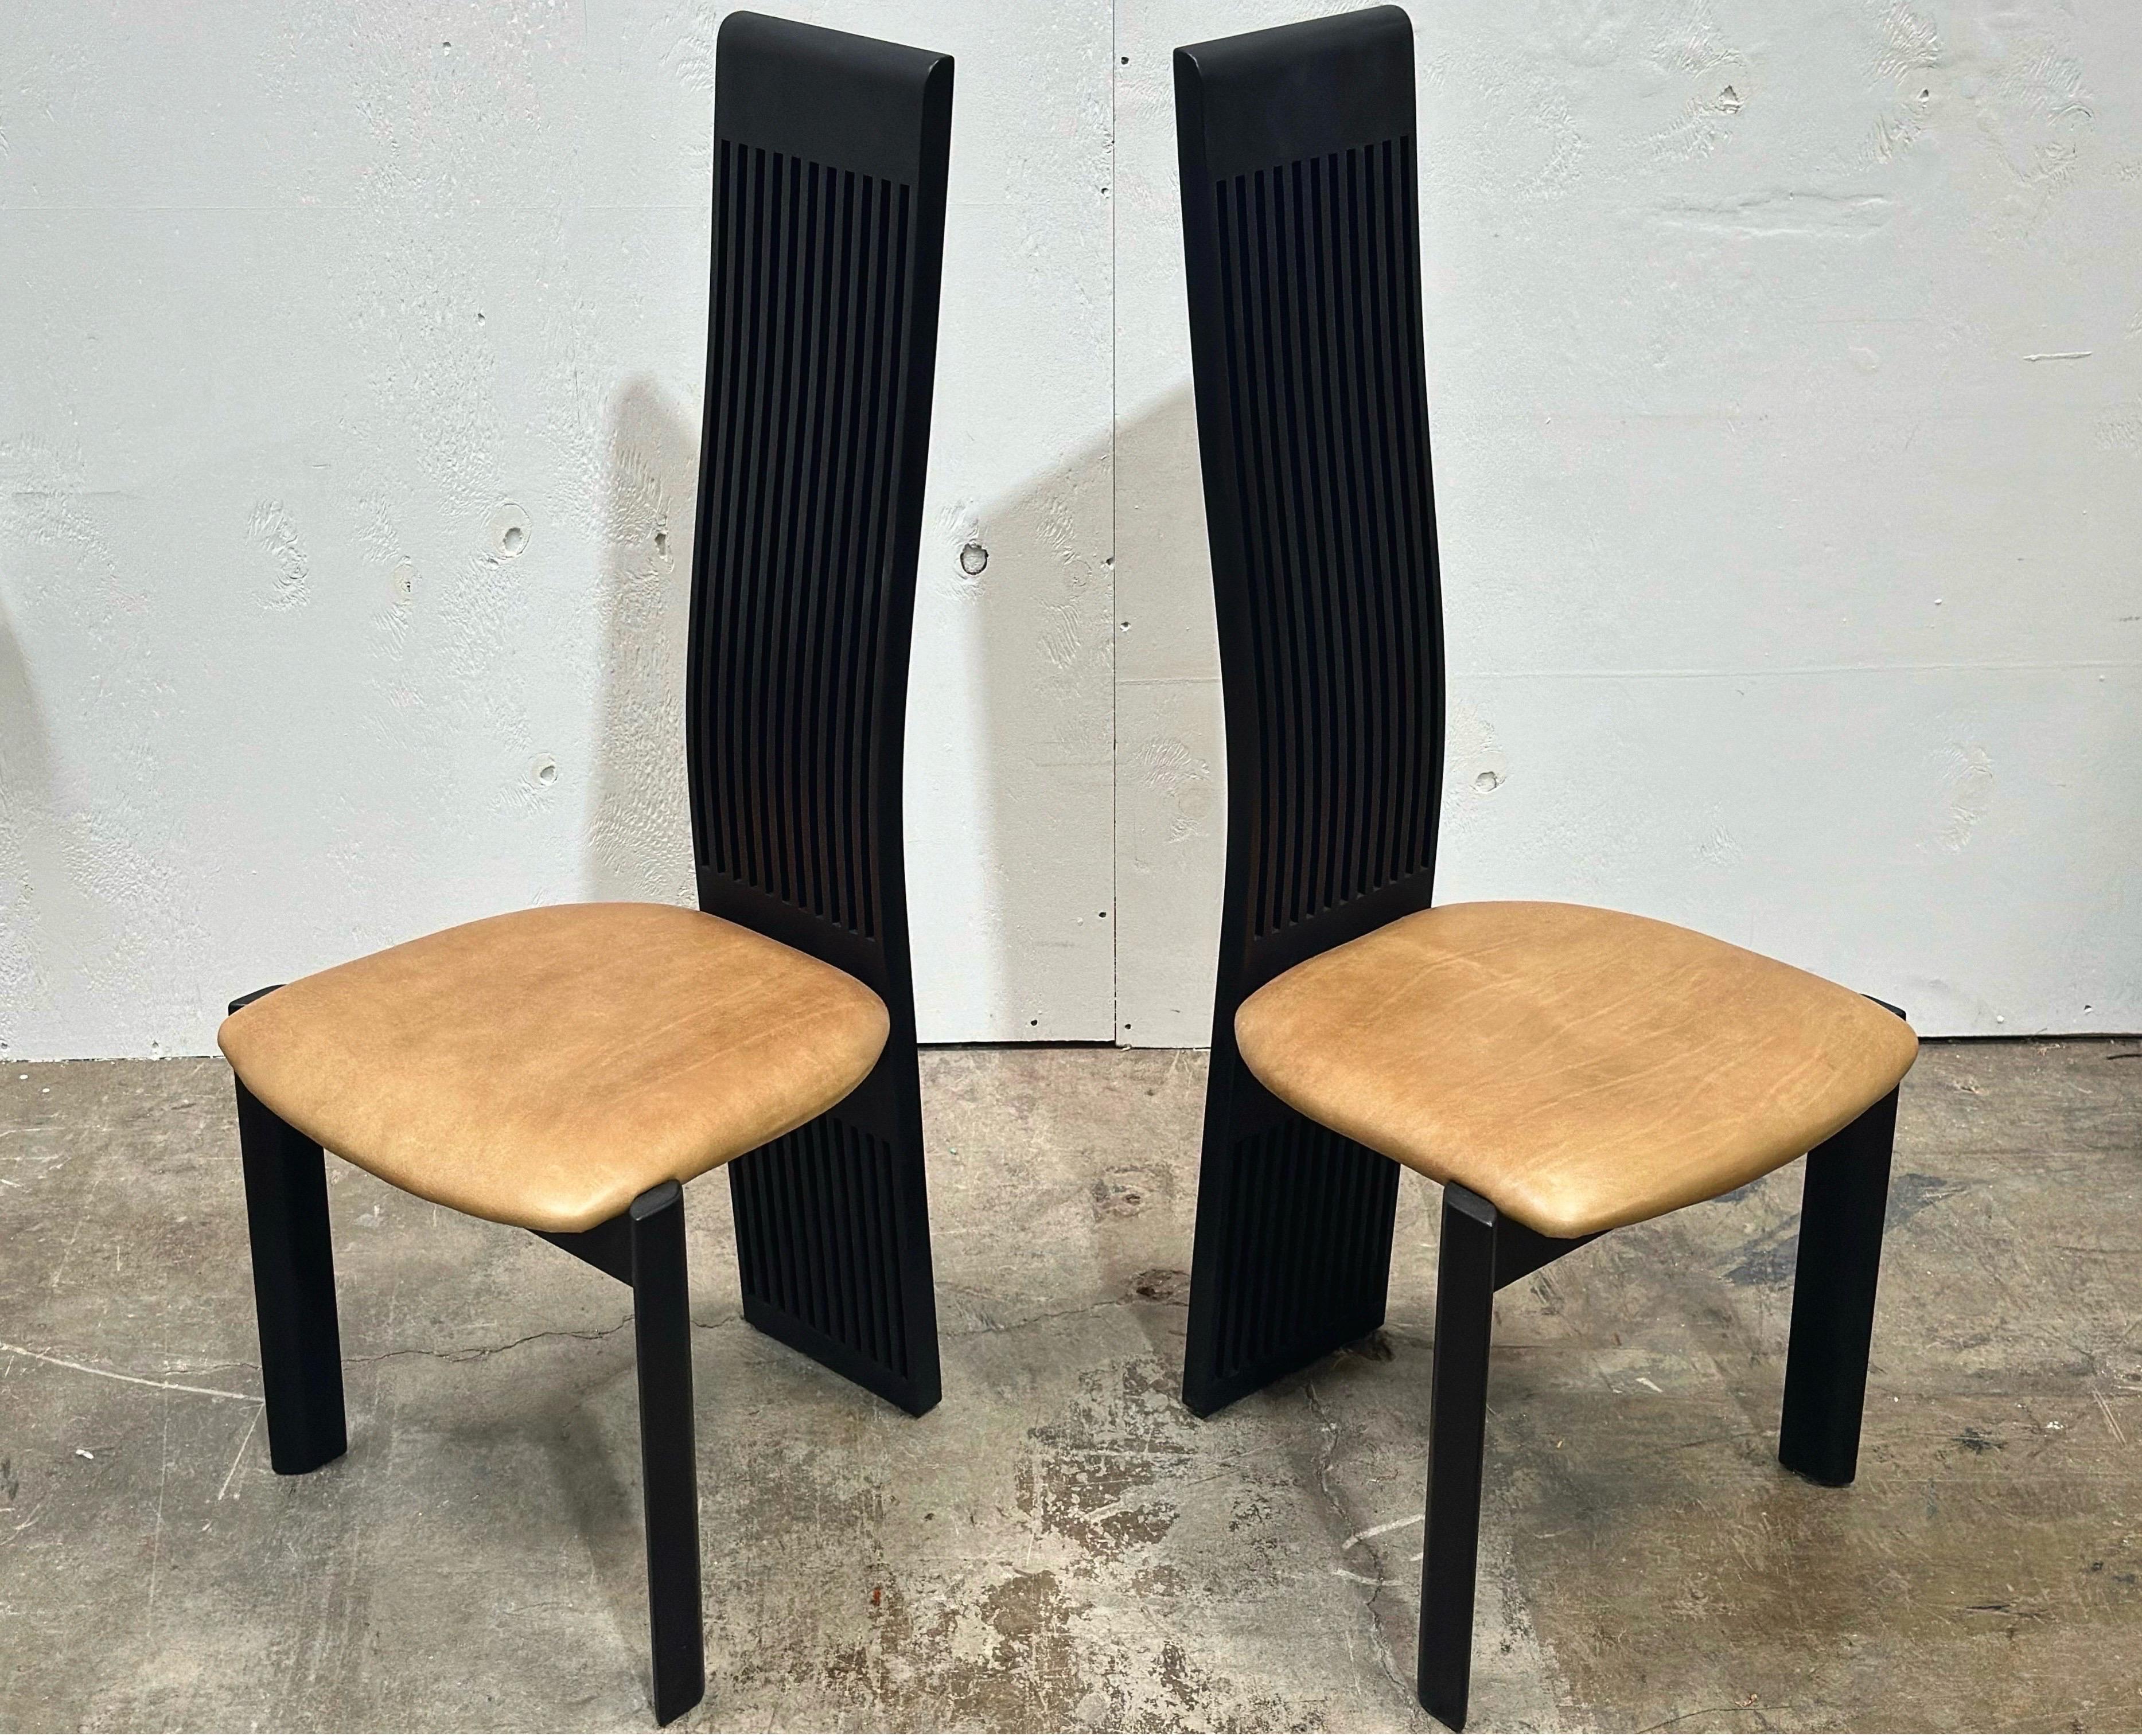 One pair / set of two Pietro Costantini post modern high back dining chairs with exaggerated slatted backrests and leather seats.

Constructed from solid beech wood frames with a semi gloss black lacquer finish, seats are upholstered in a gorgeous